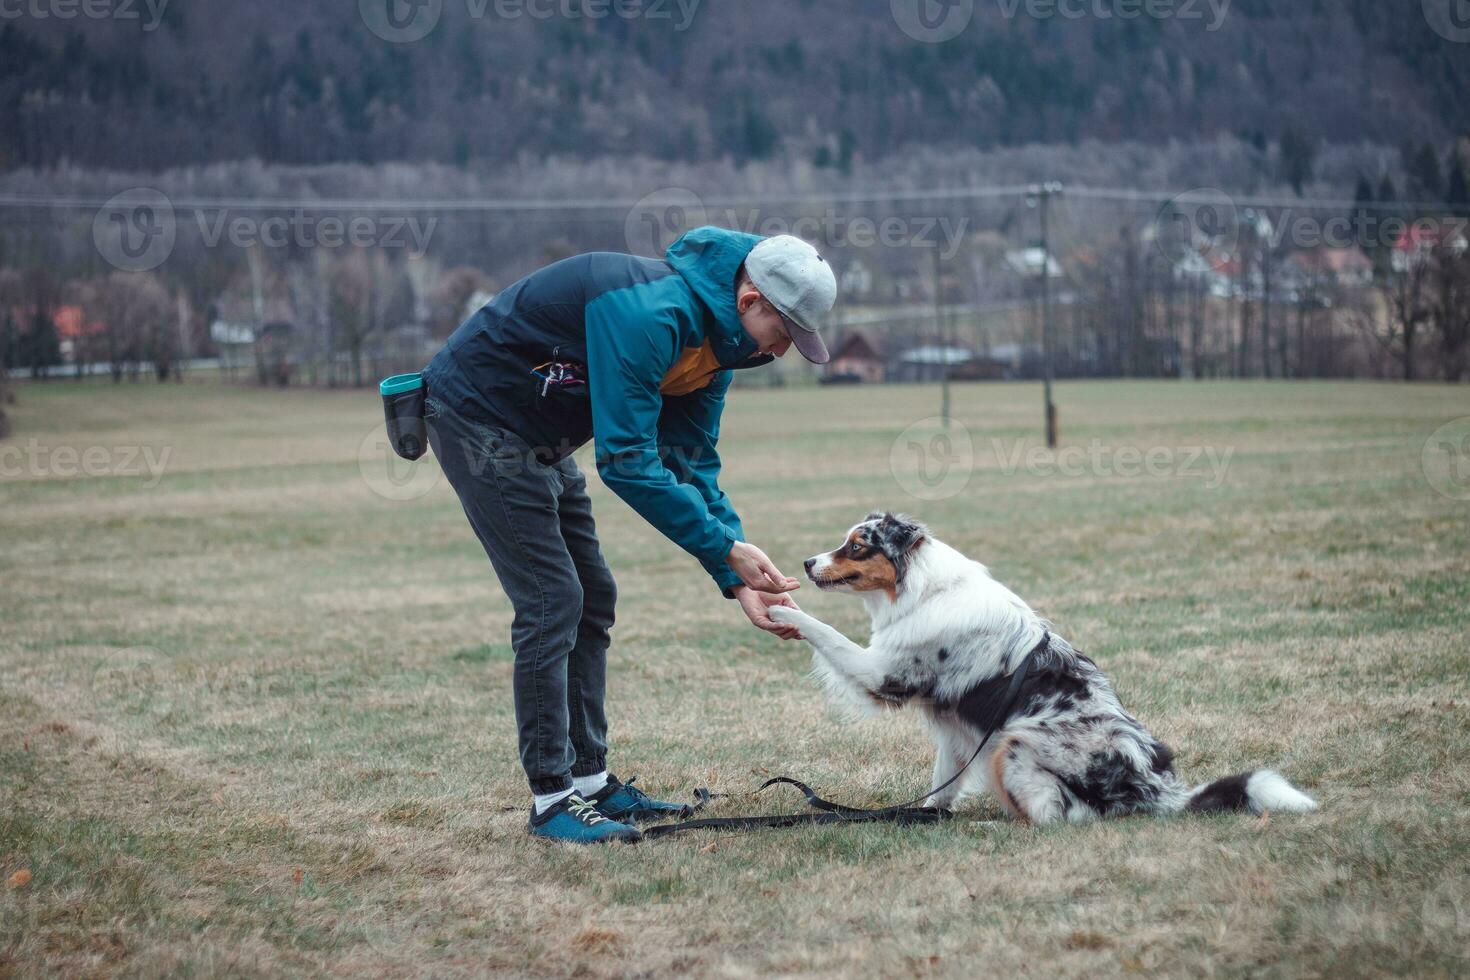 Young cynologist, a dog trainer trains a four-legged pet Australian Shepherd in basic commands using treats. Love between dog and human photo